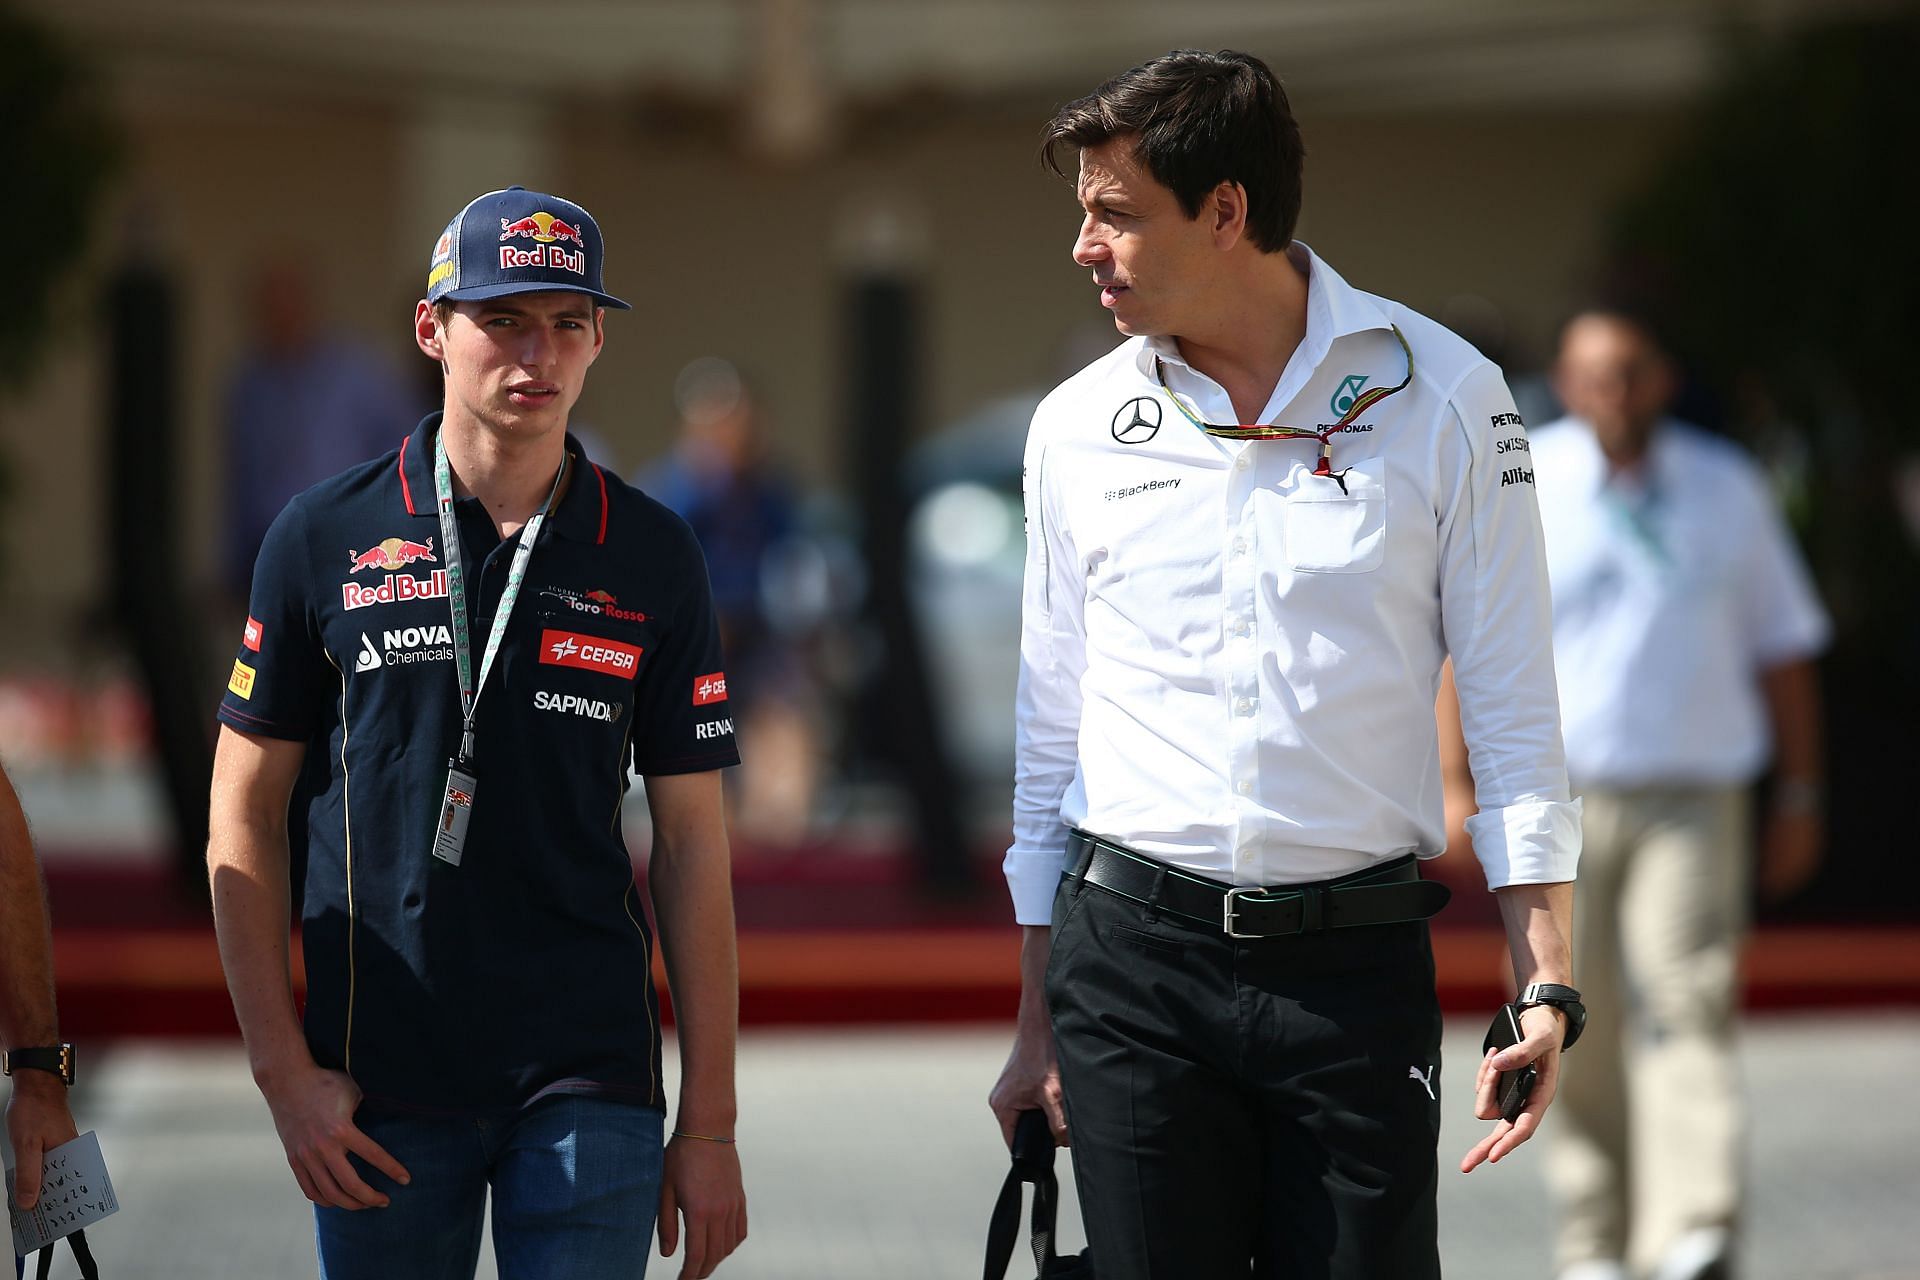 Max Verstappen speaks with Mercedes GP Executive Director Toto Wolff during the 2014 Abu Dhabi Grand Prix weekend.